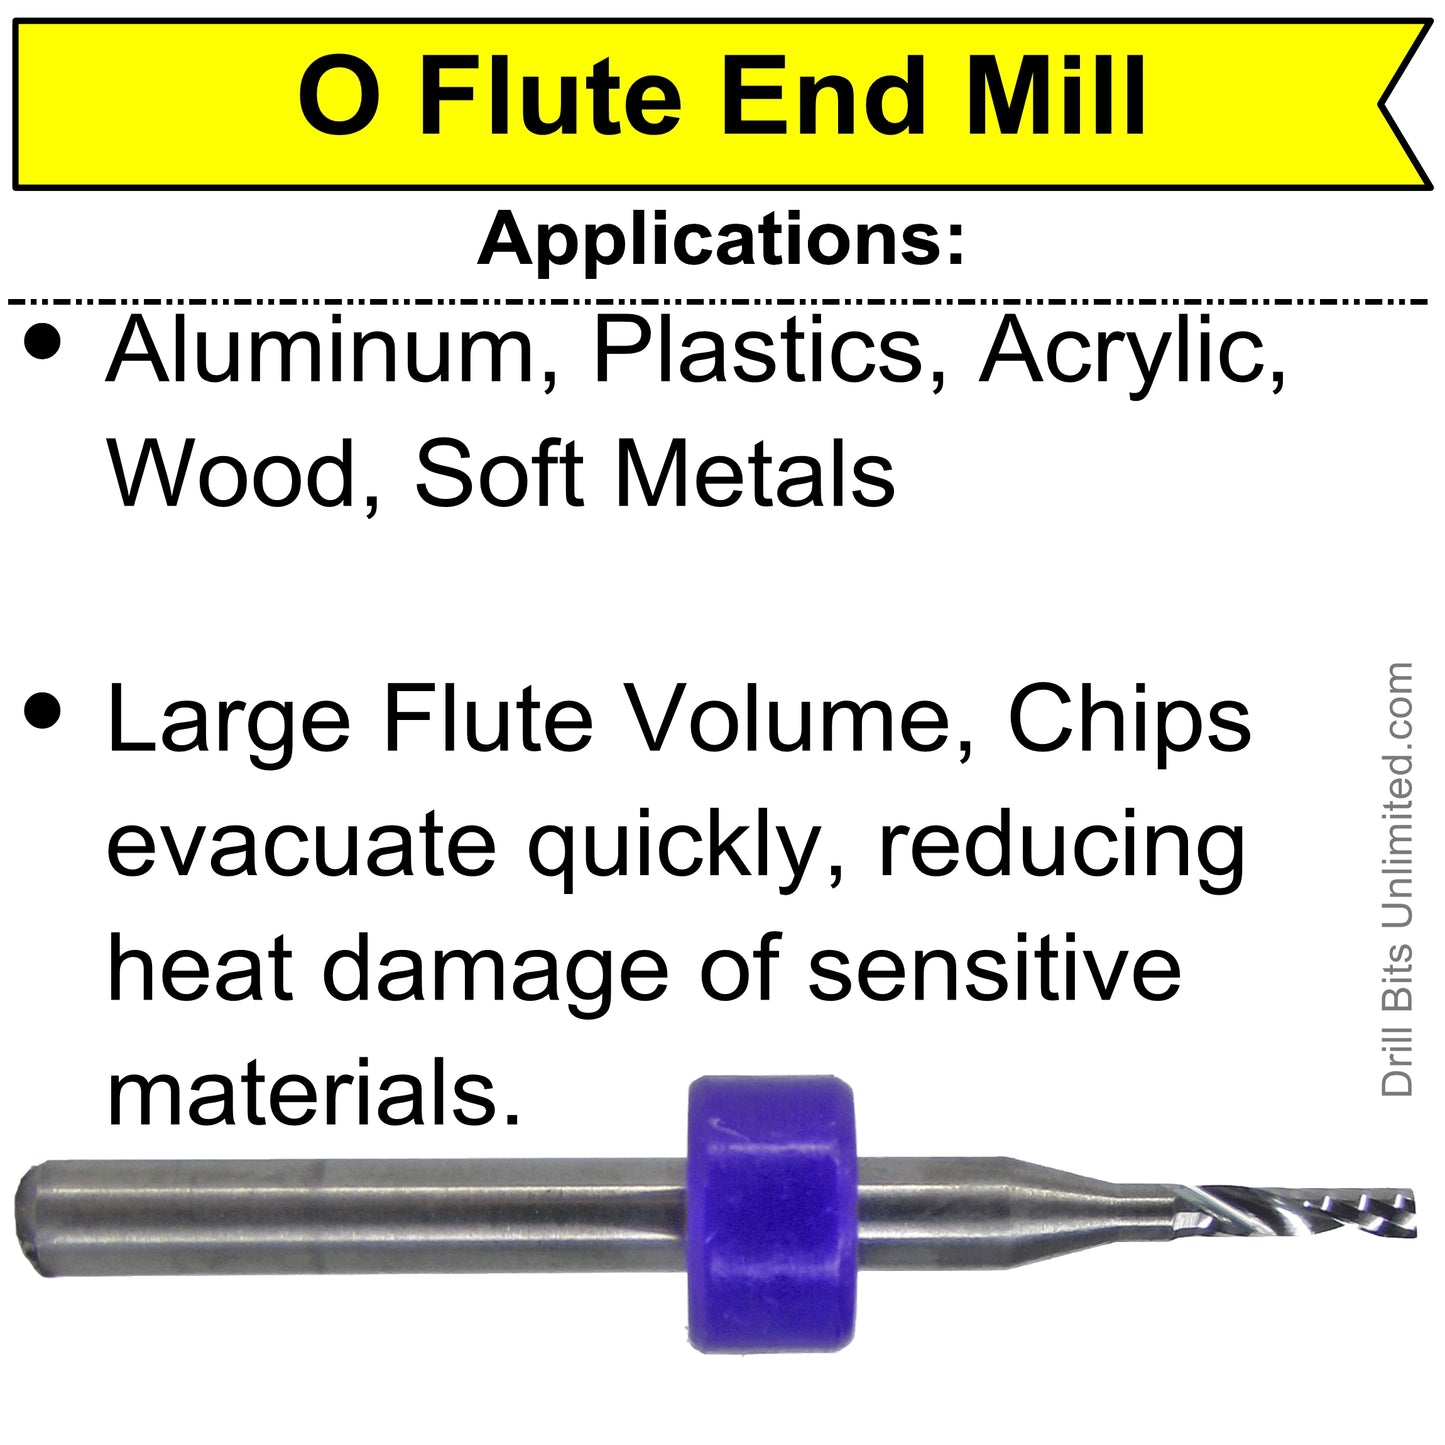 1/8" x 0.5" UP-CUT Premium Quality Single O-flute End Mill Made in USA for Aluminum Acrylic Plastic